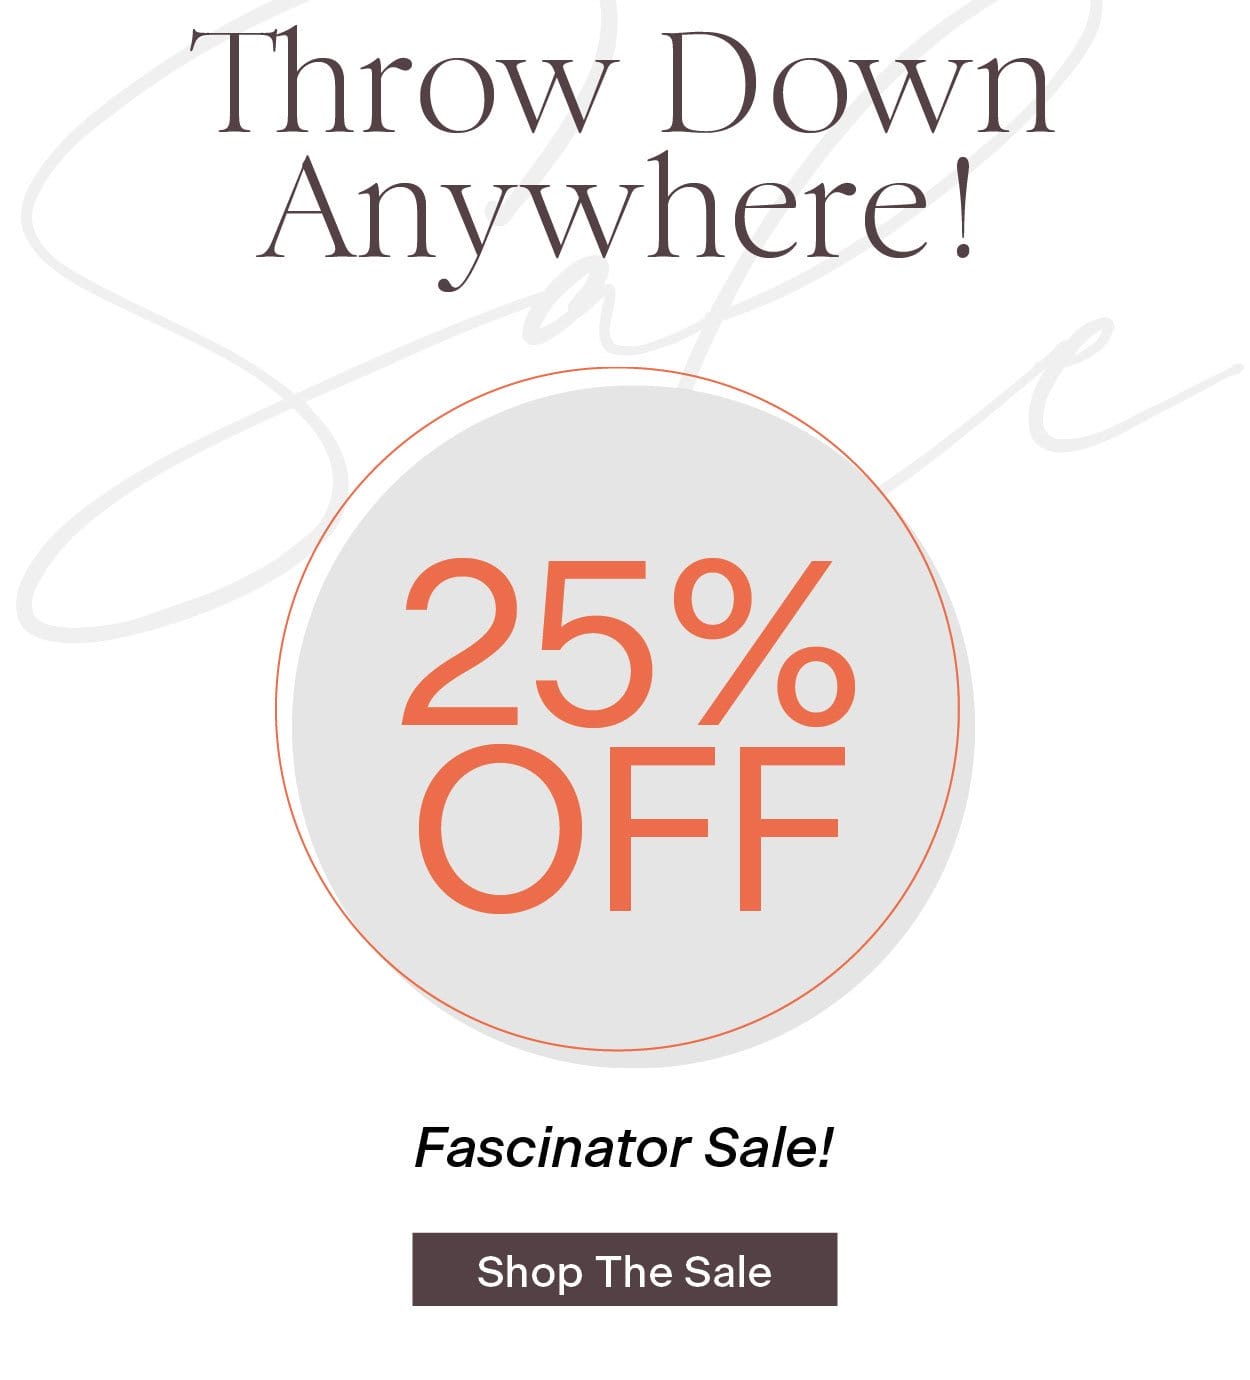 Throw Down Anywhere! 25% off Fascinator Sale! Shop the Sale